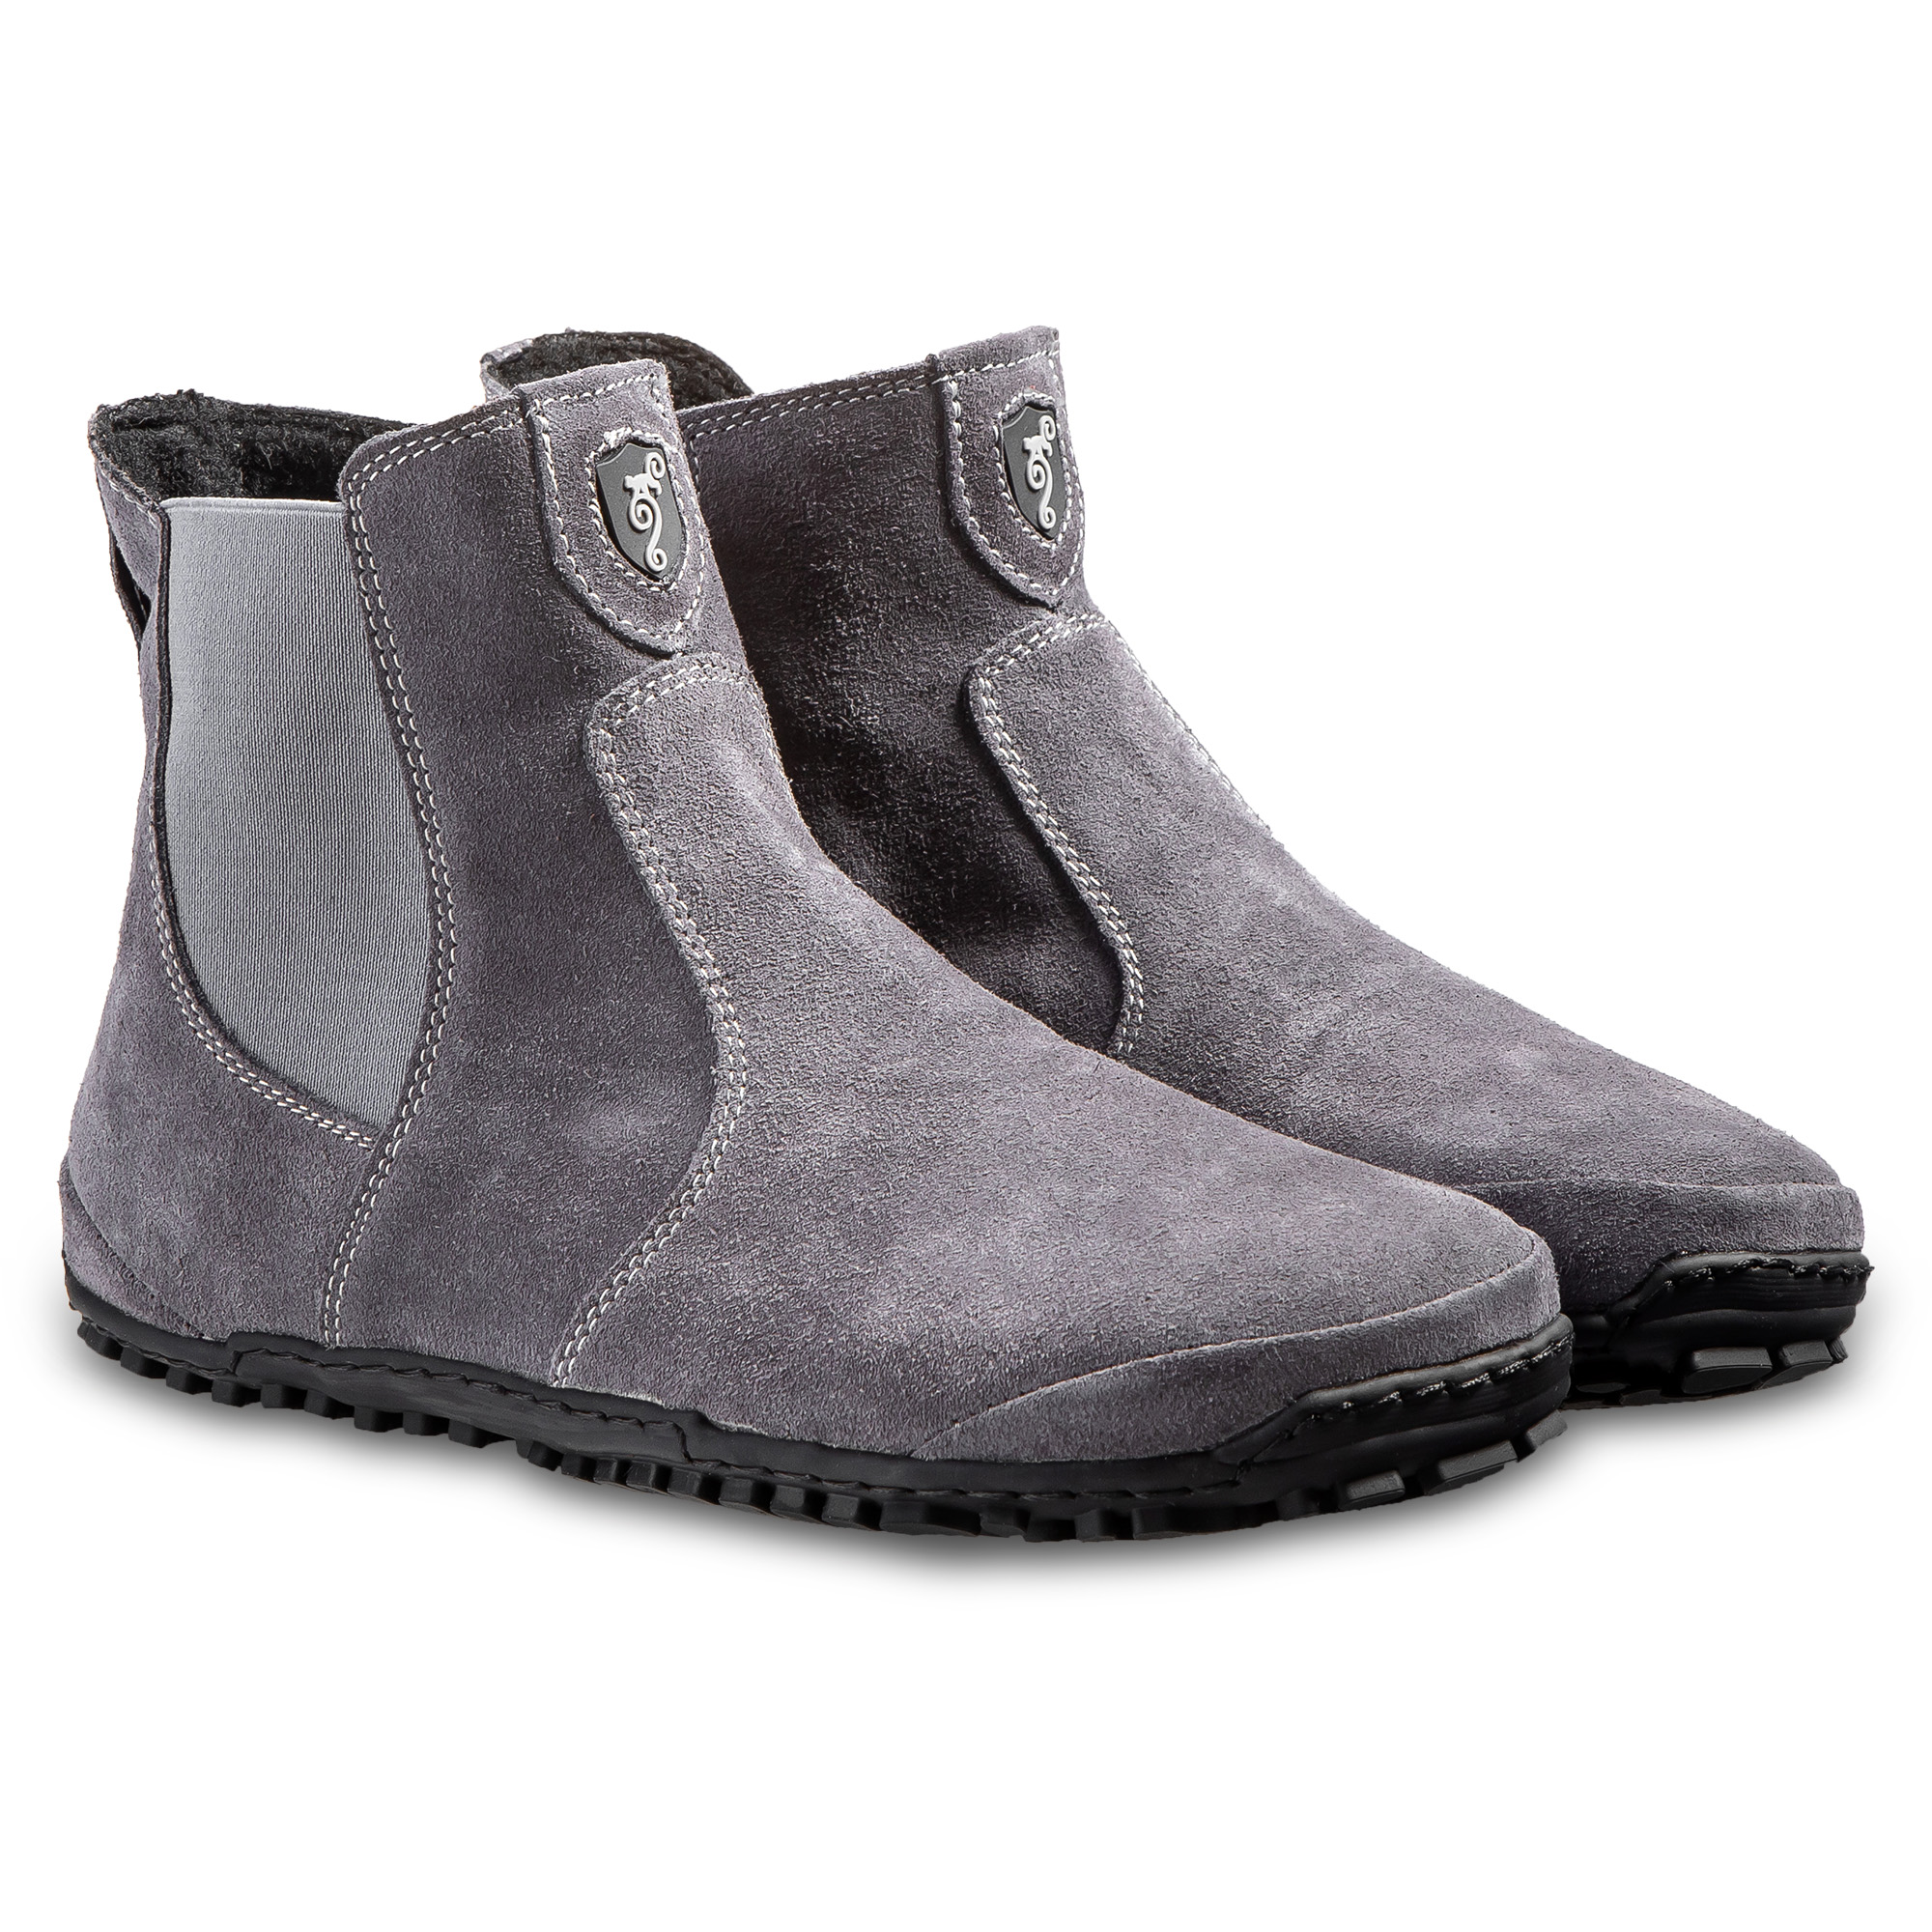 patologisk Min tone Leather women's barefoot boots - Magical Shoes Lupino Gray